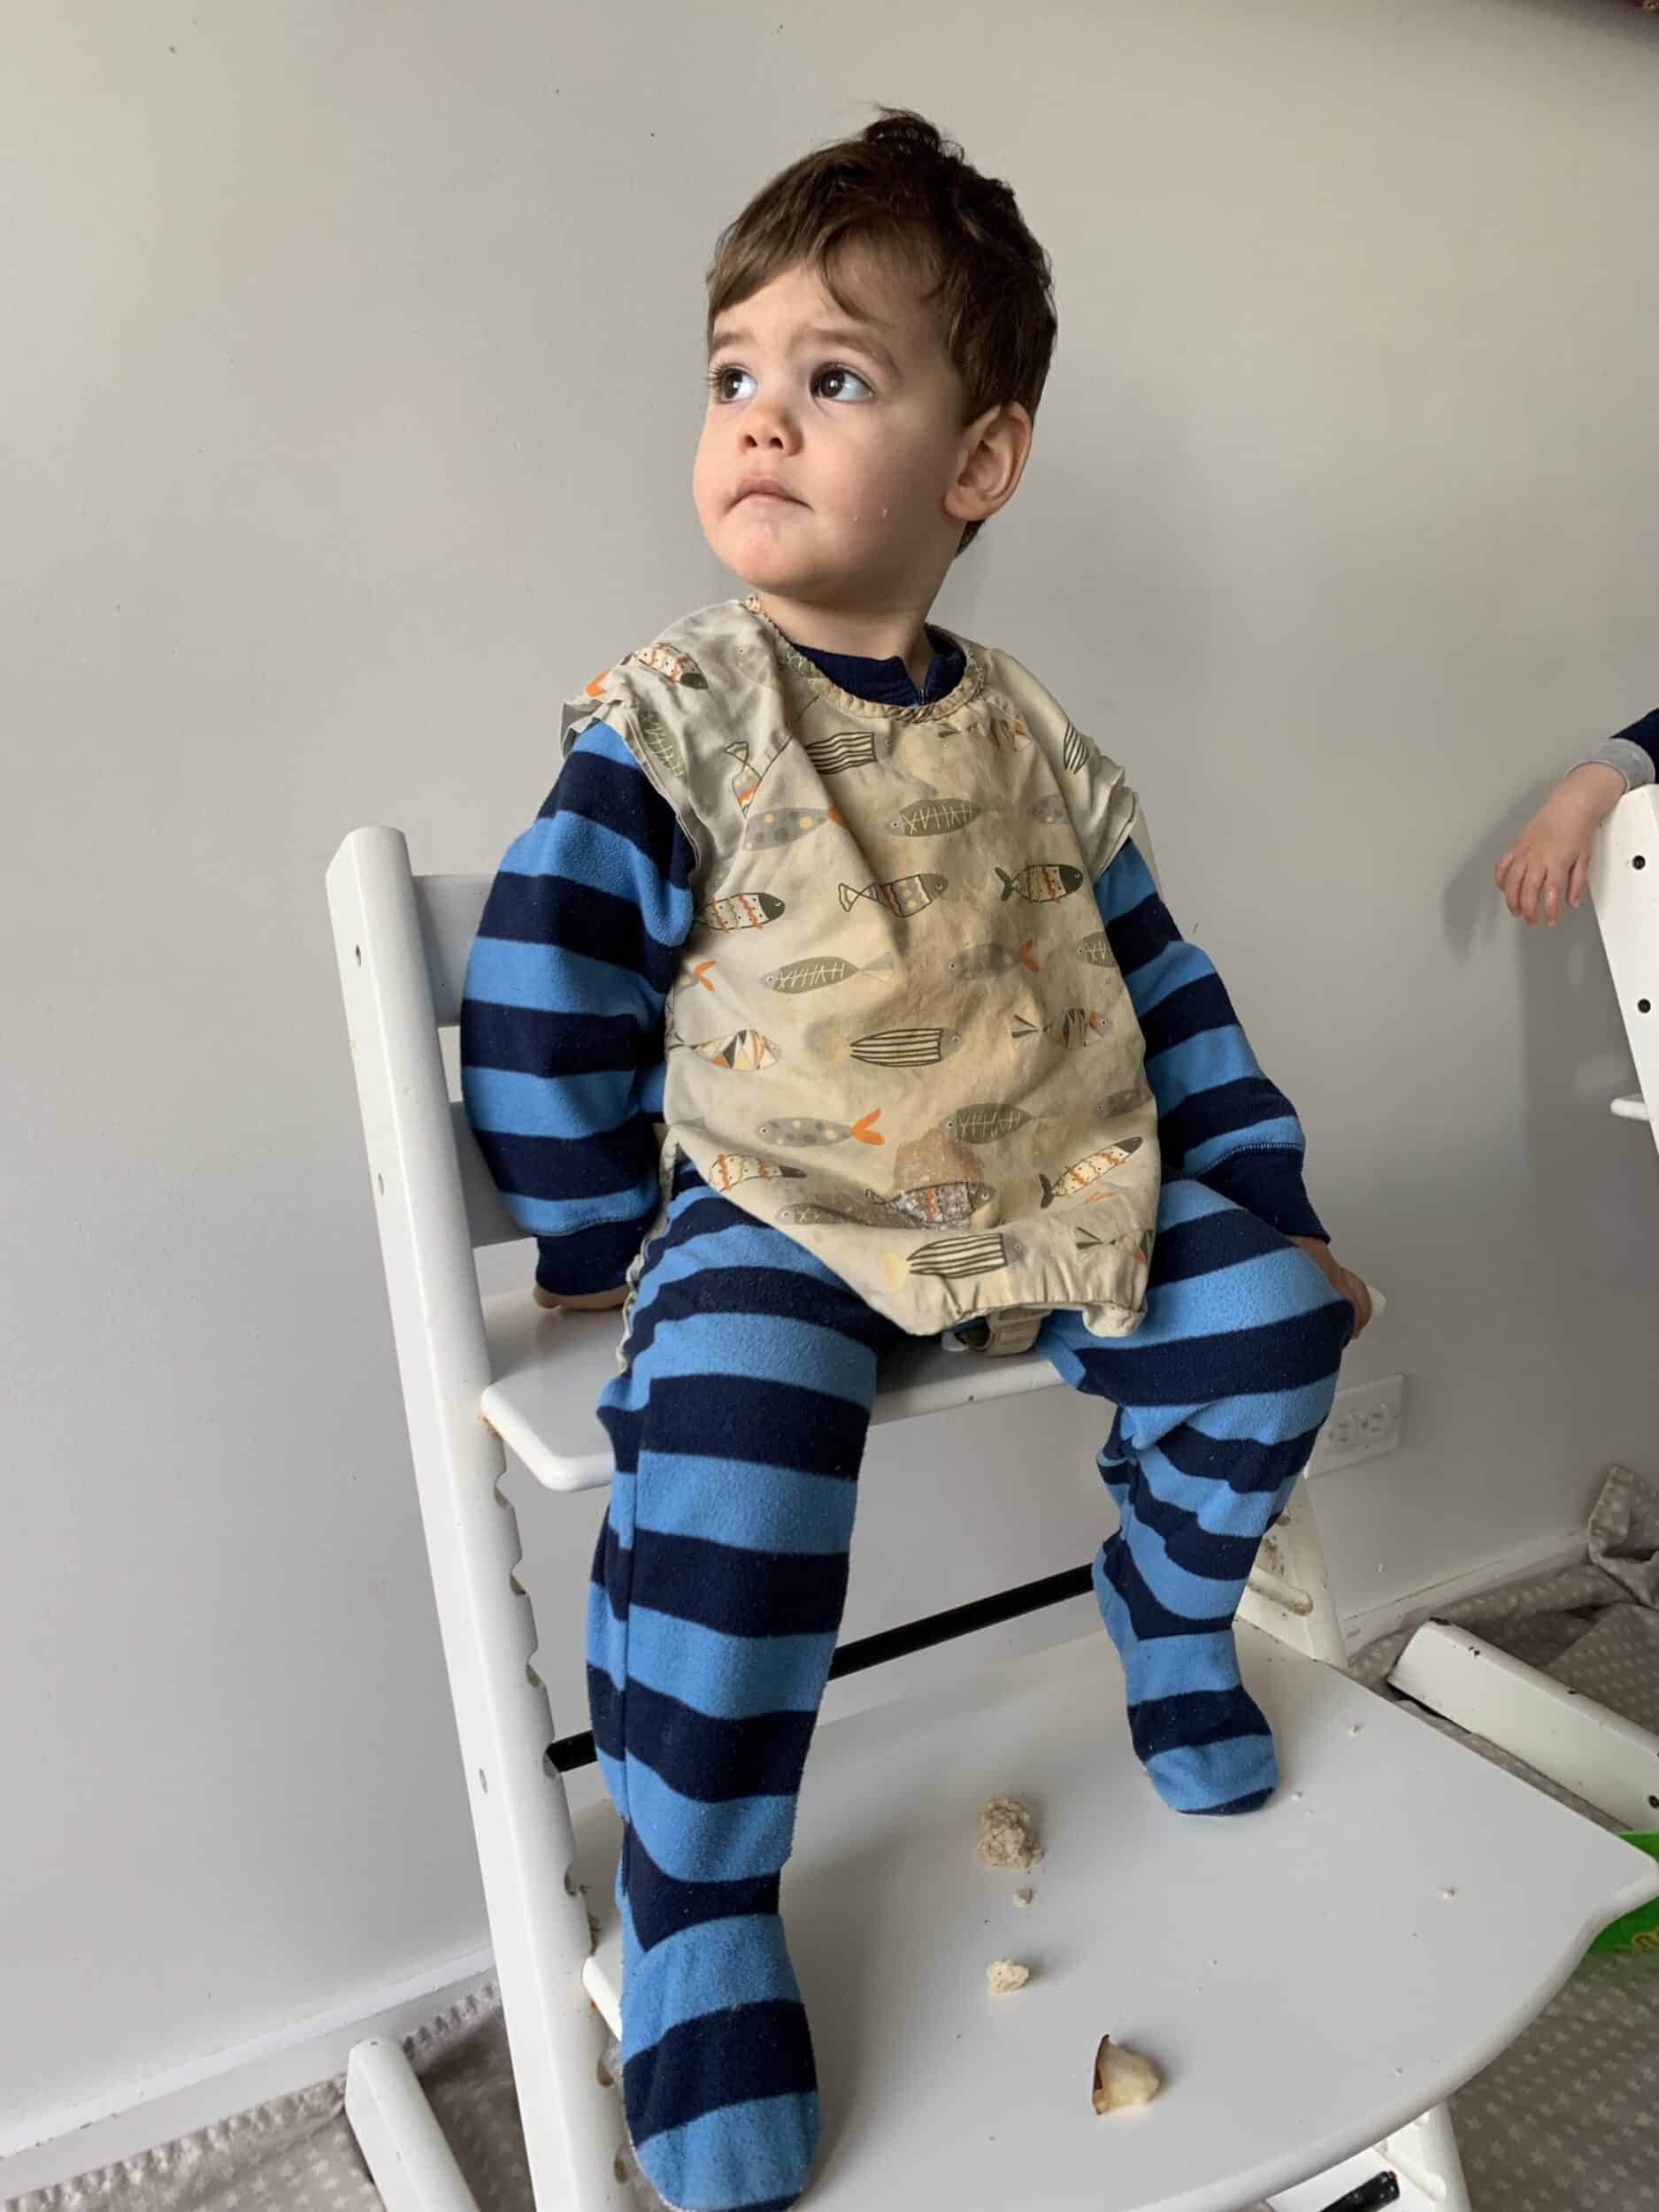 baby in footed pajamas and a bib sitting in a highchair